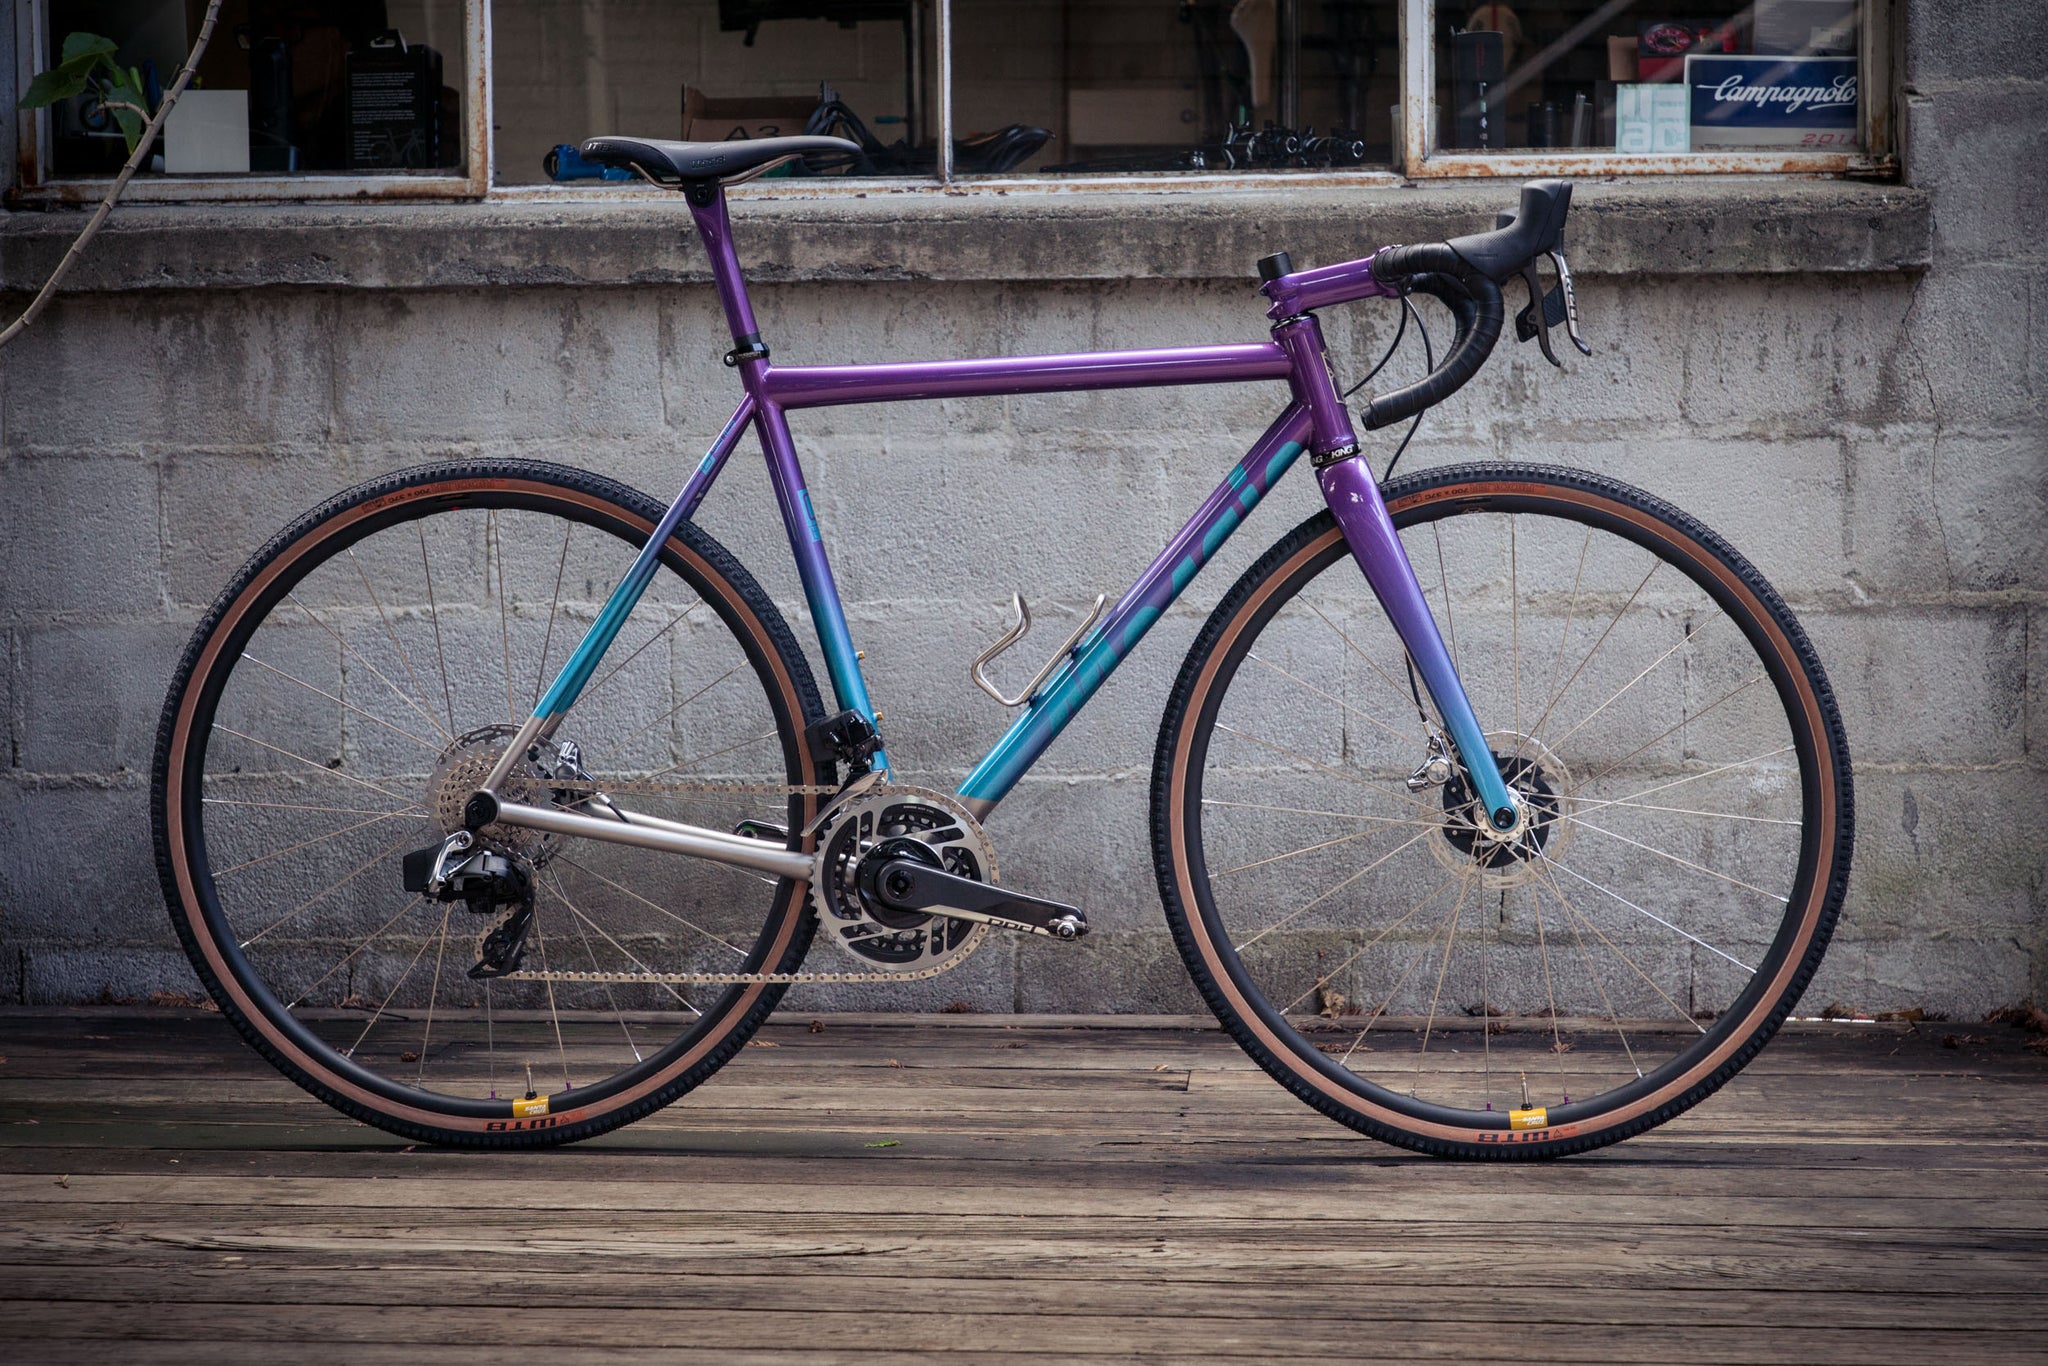 mosaic cycles gt1 lost and found profile outdoor